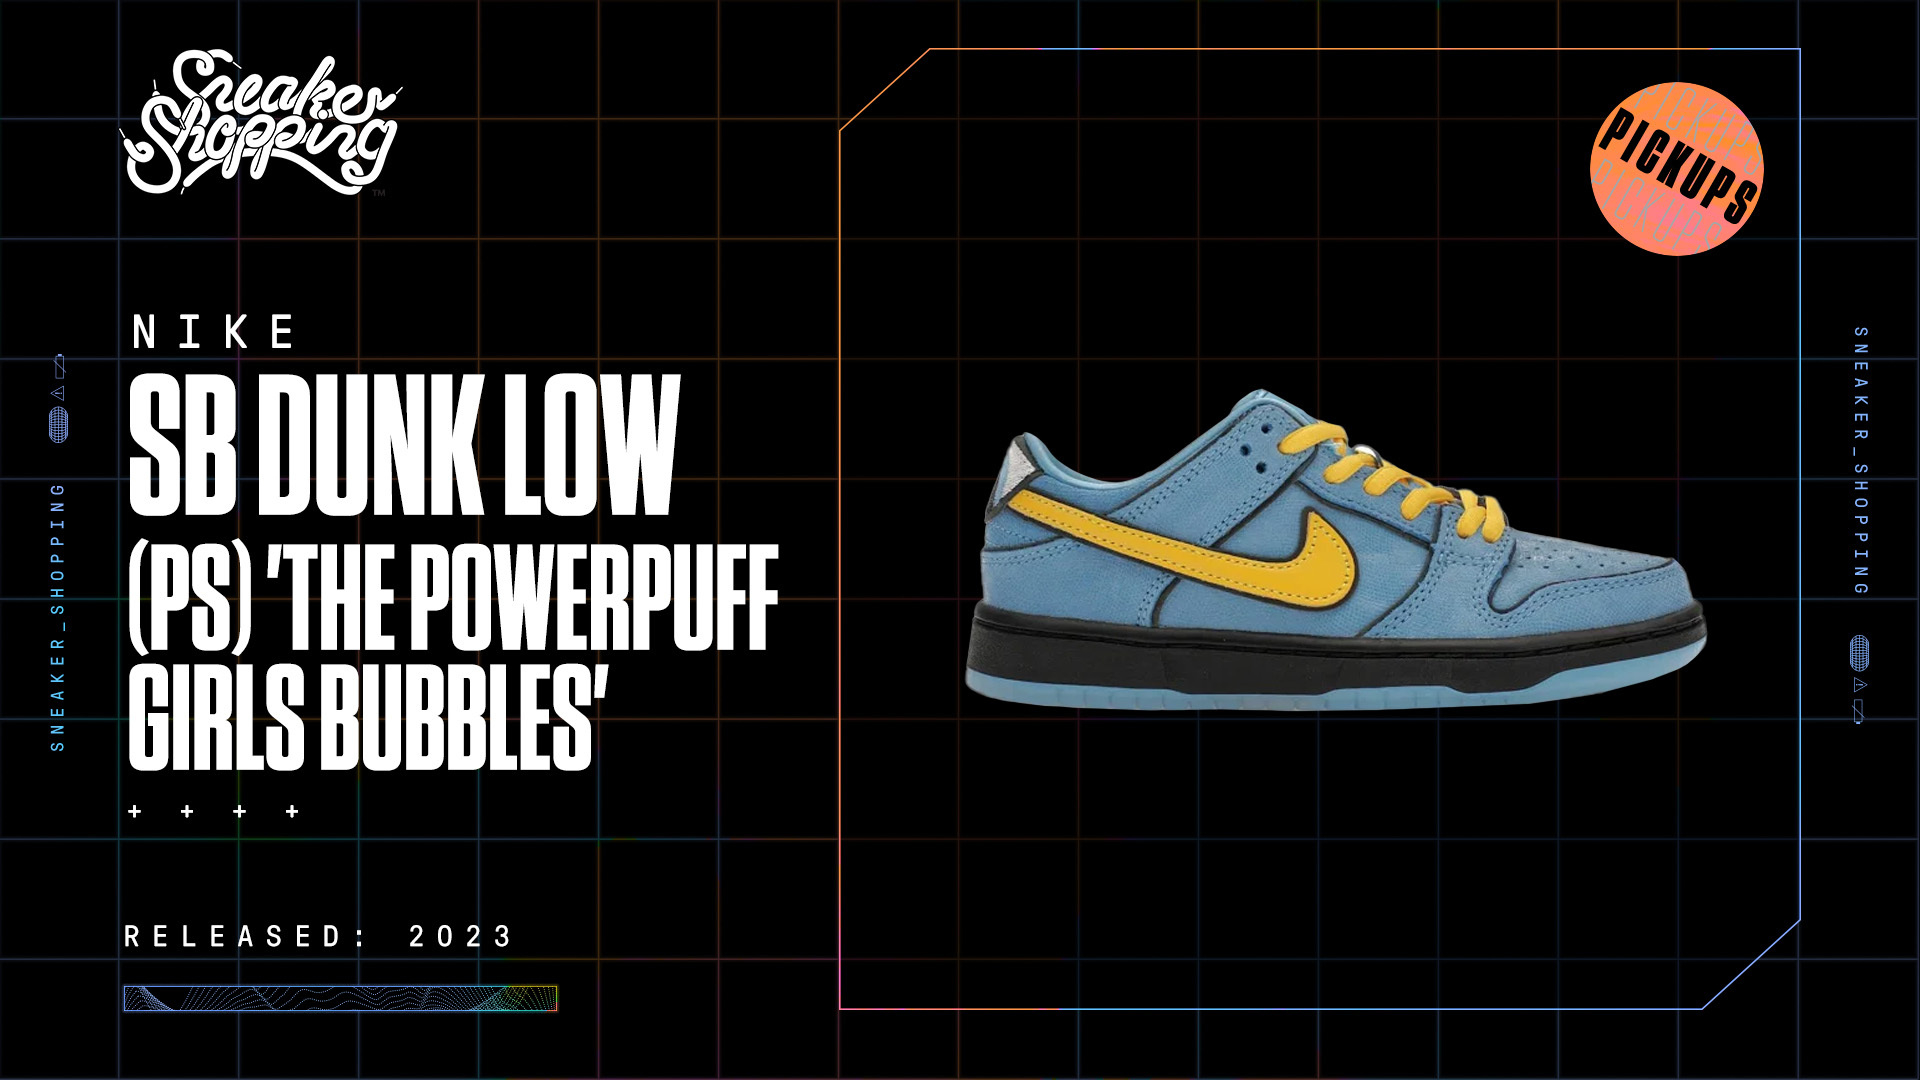 Nike SB Dunk Low (PS) &#x27;The Powerpuff Girls Bubbles&#x27; sneaker with a yellow swoosh. Released: 2023. Text reads: Sneaker Shopping, Pickups